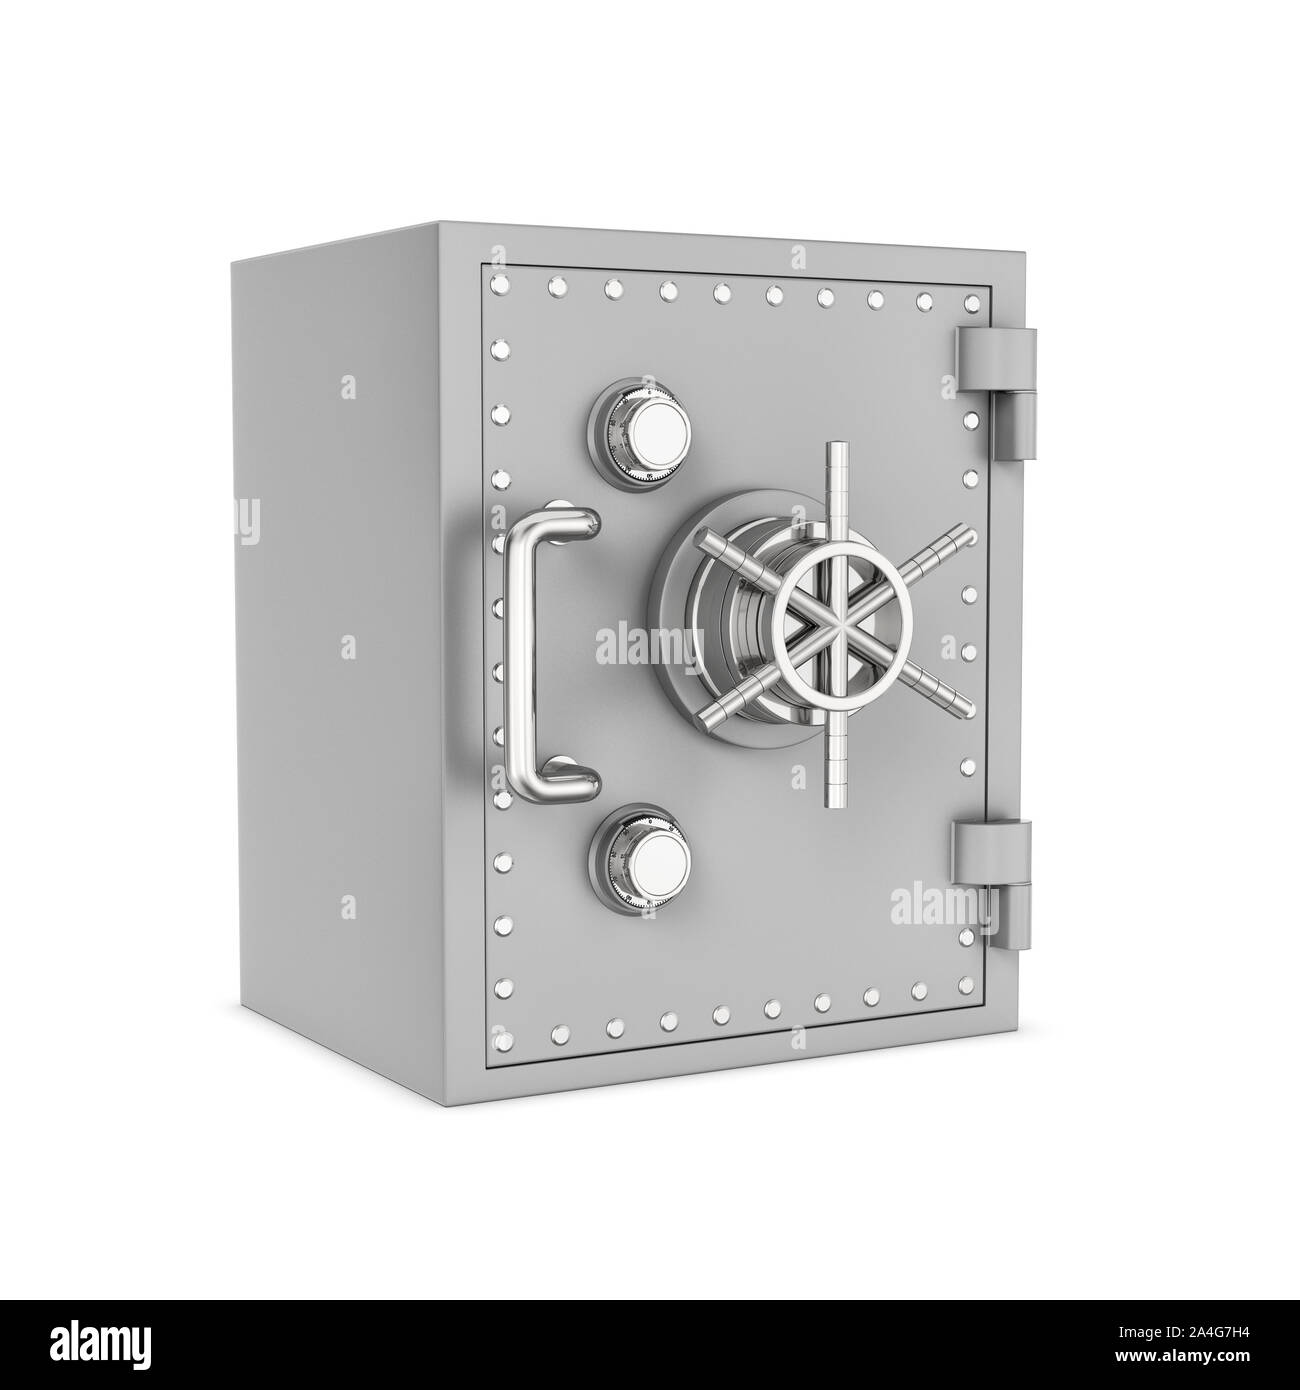 3d rendering of a steel safe box isolated on a white background. Security storage. Bulletproof and fireproof. Keeping money. Stock Photo